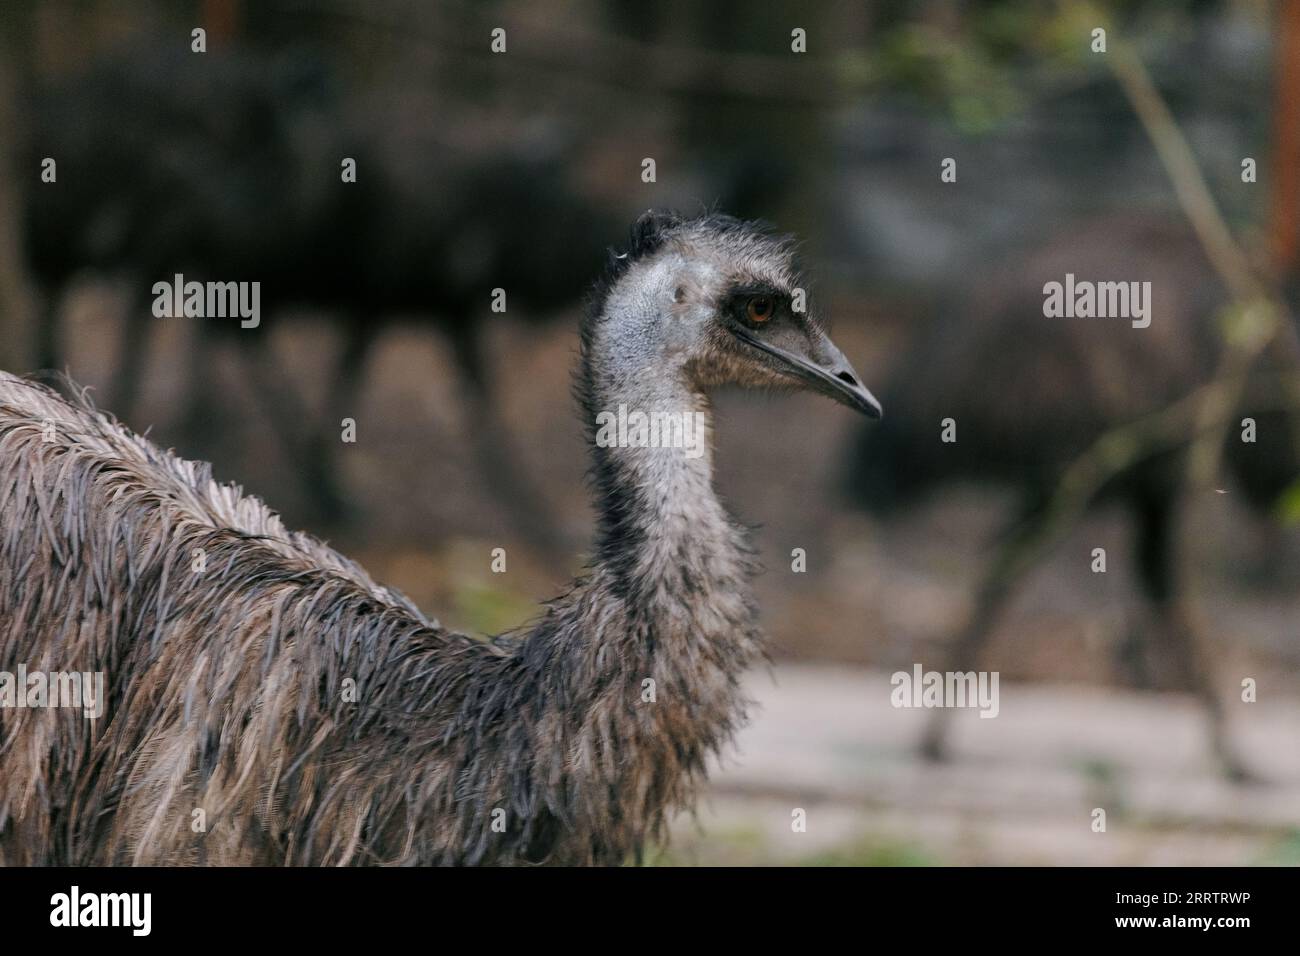 Close-up and side view to australian emu ostrich. Wild animal in wildlife reserve. Flightless birds. Stock Photo